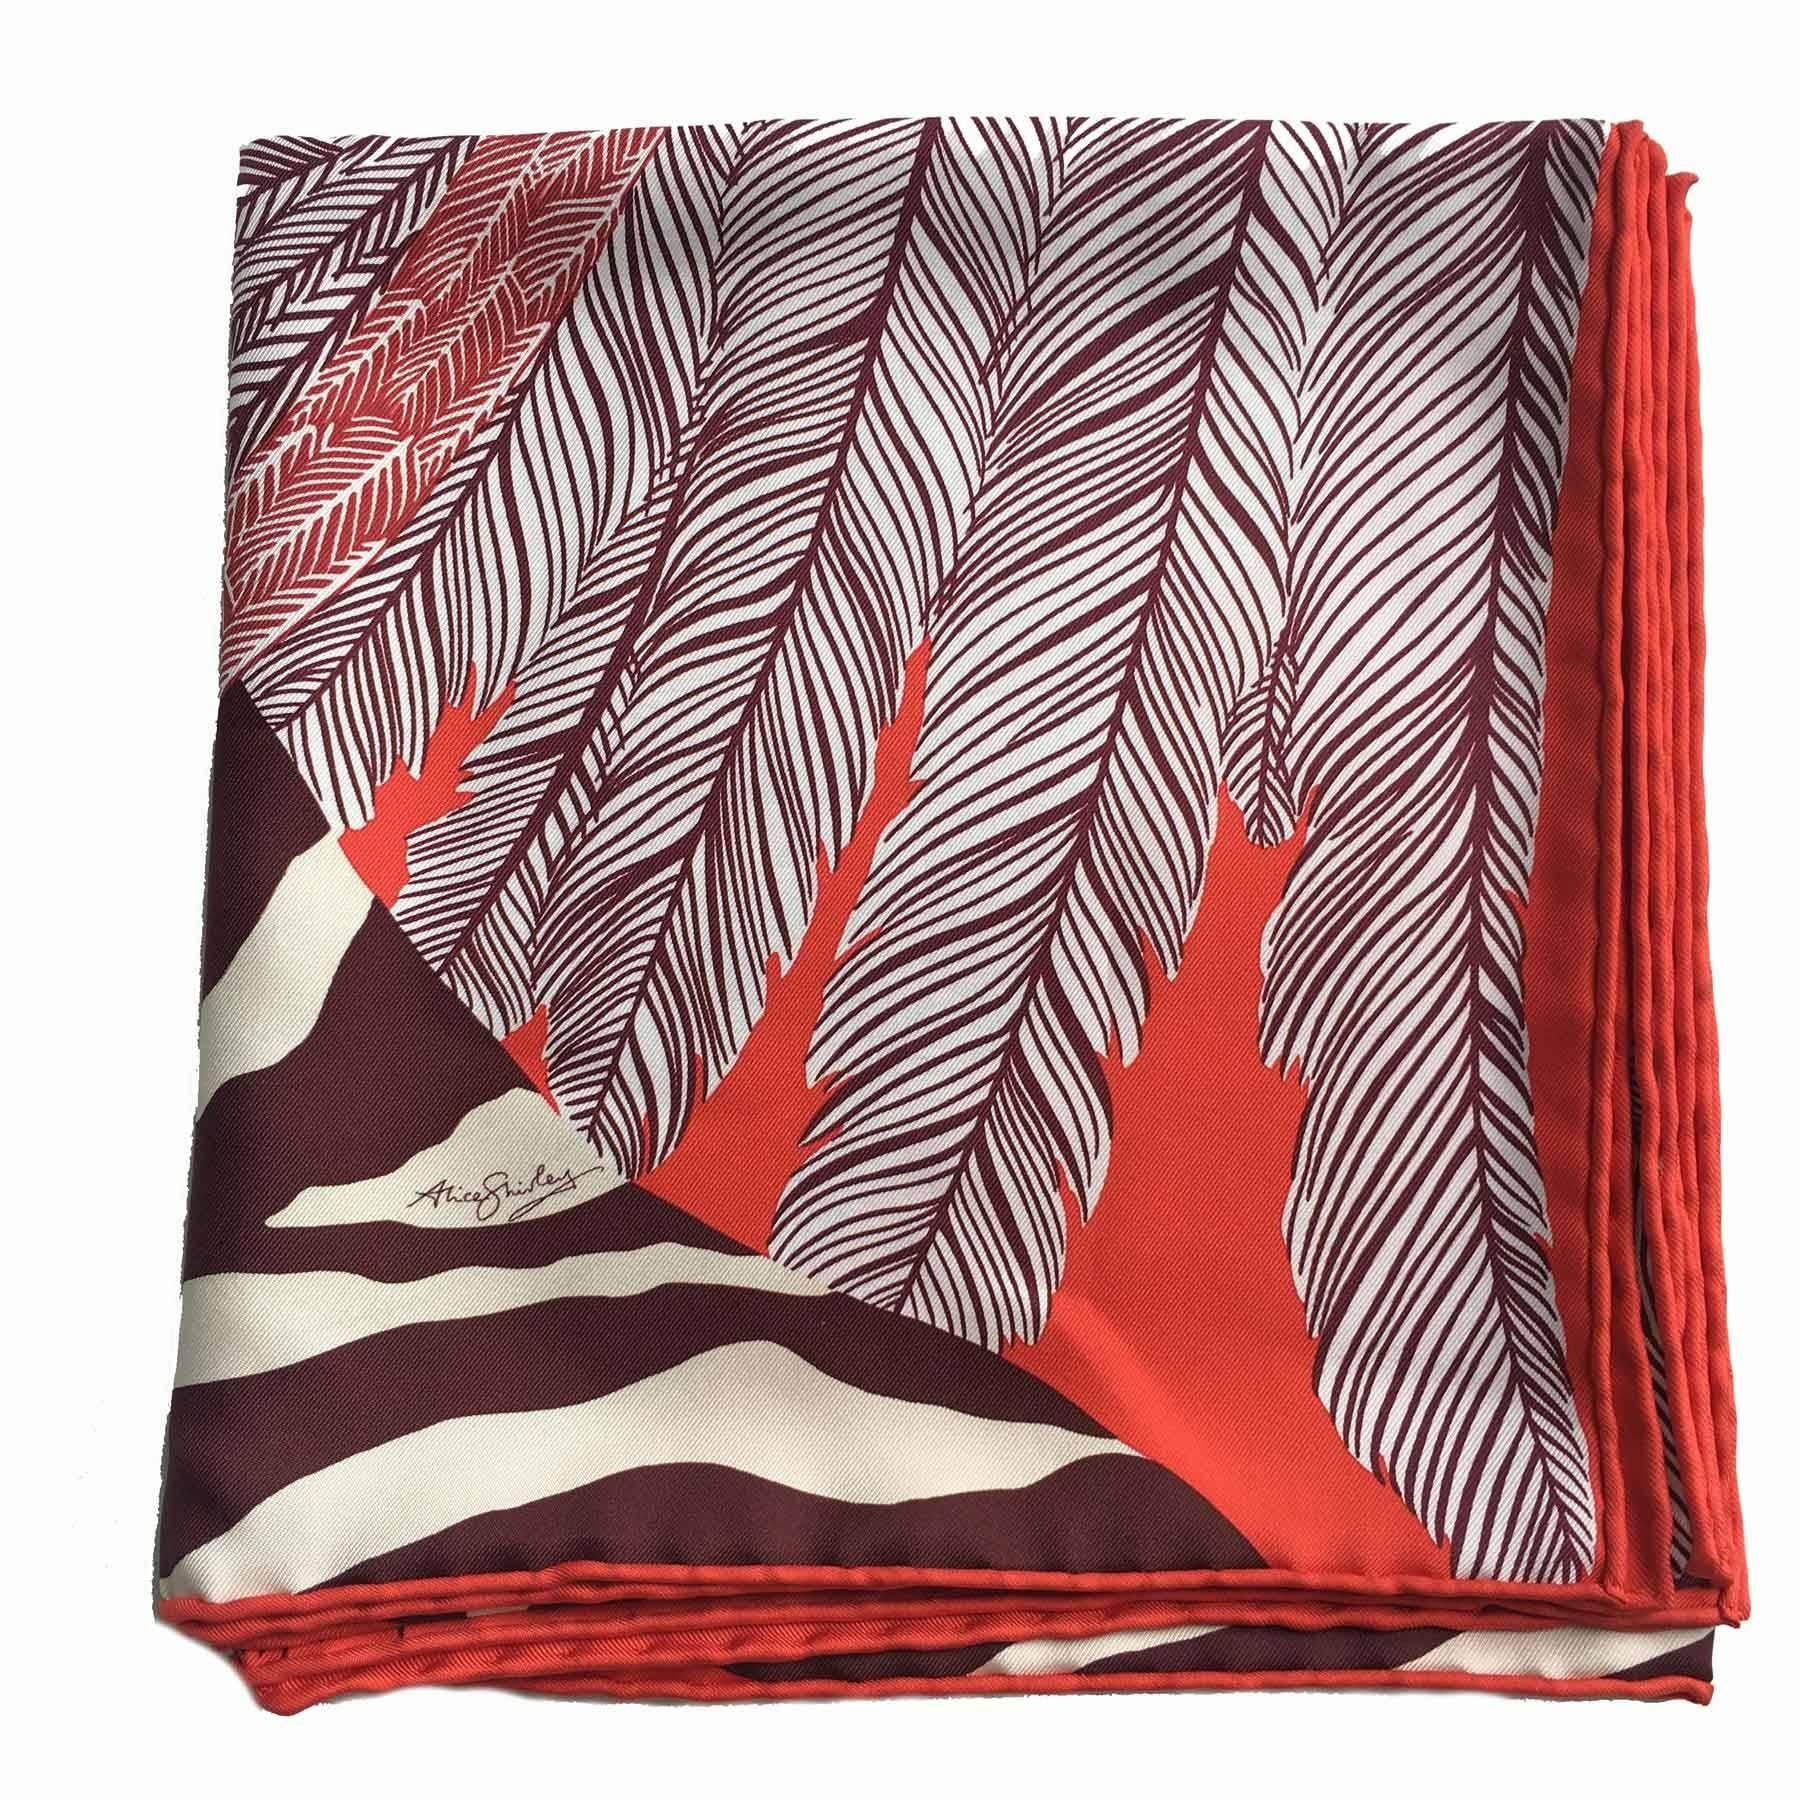 Very beautiful Hermès 'ZEBRA PEGASUS' scarf in red, violet and beige silk.

Designed by: Alice Shirley

Delivered in a Valois Vintage Paris Dustbag